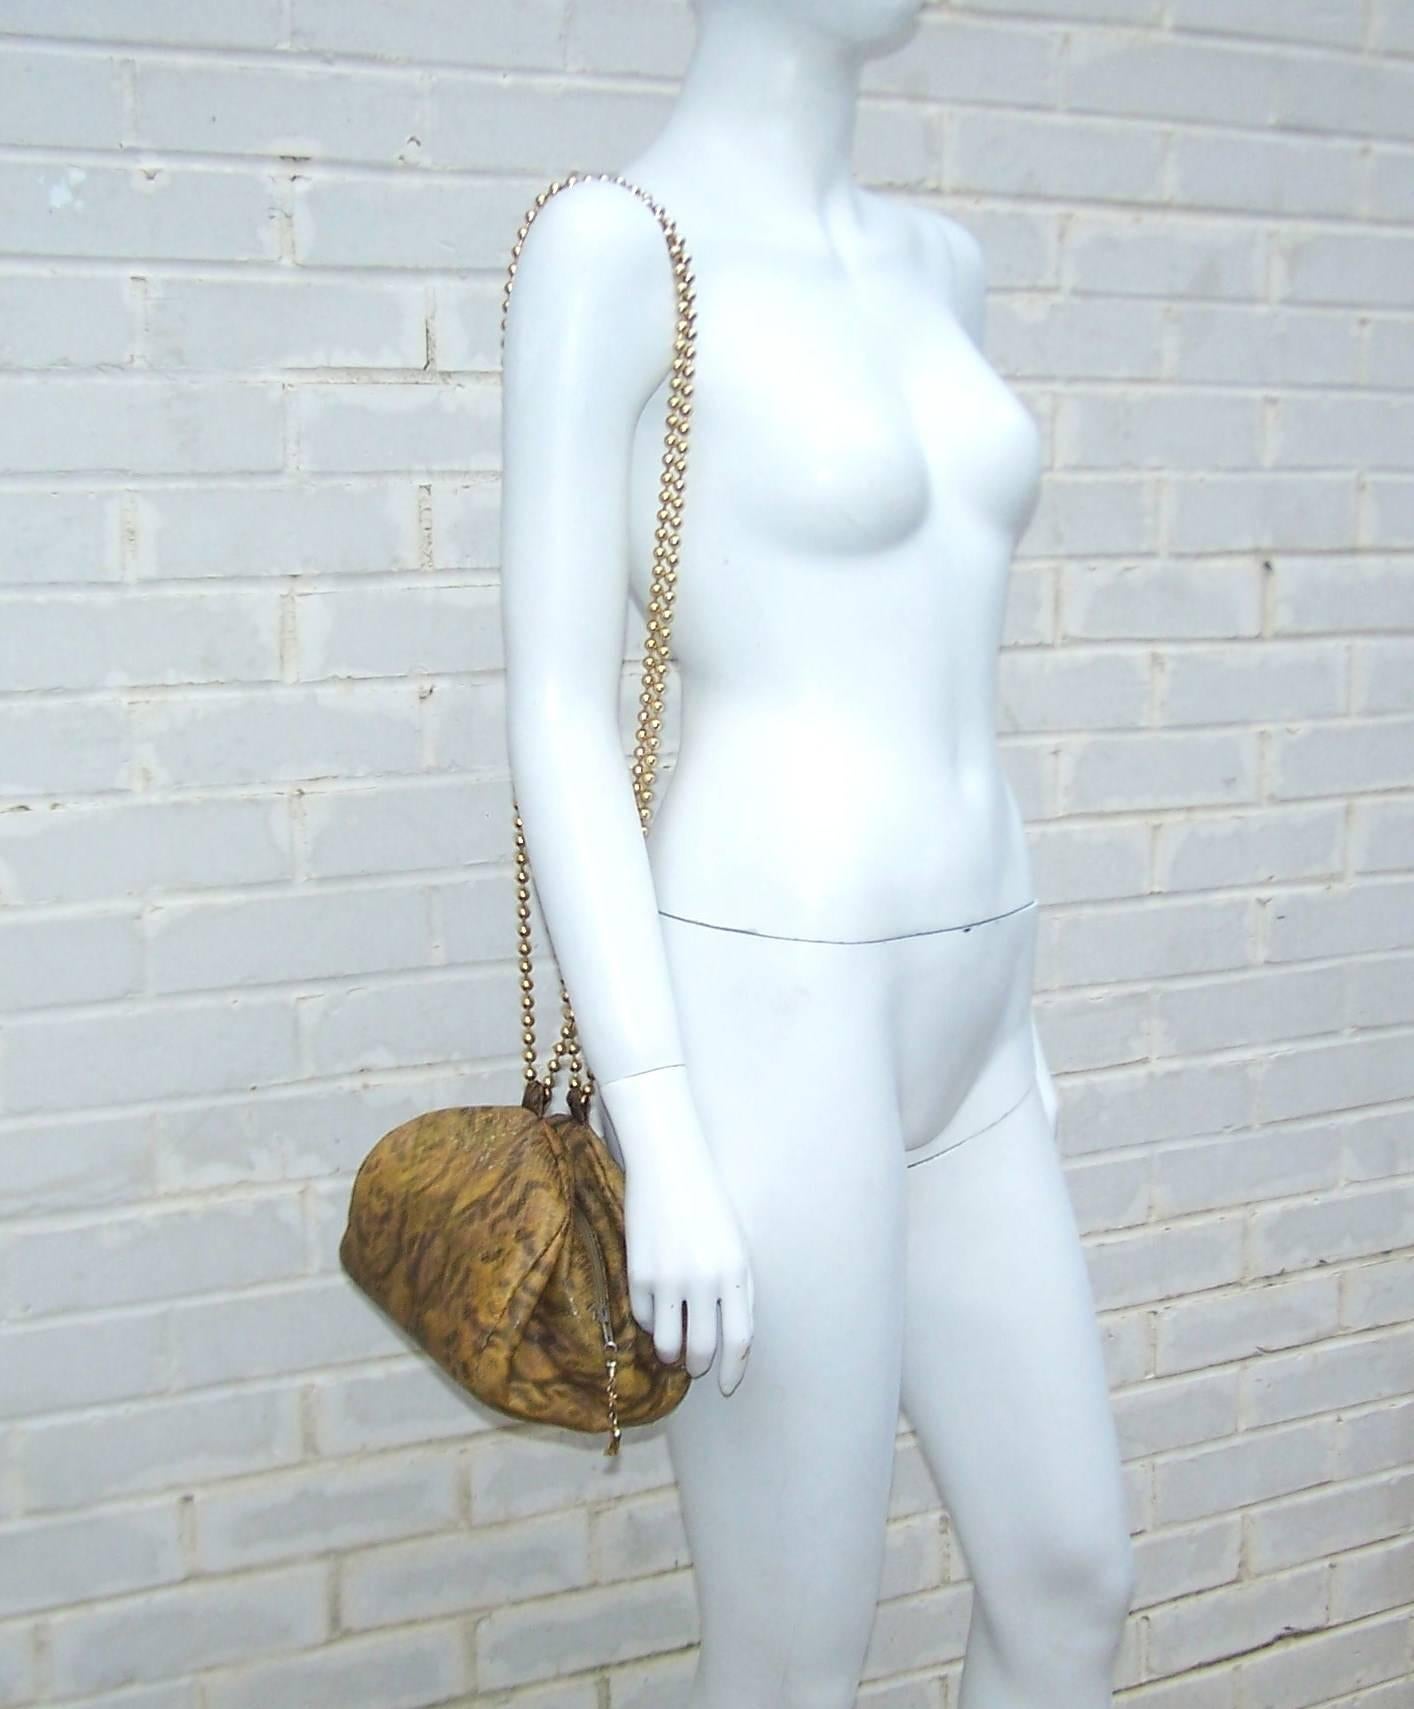 Maud Frizon began her career designing shoes in the 1960's.  By the 1980's she had a well earned reputation for innovative designs using quality materials.  This amazing sack shaped snakeskin handbag is cinched together with a zipper and a snap. 